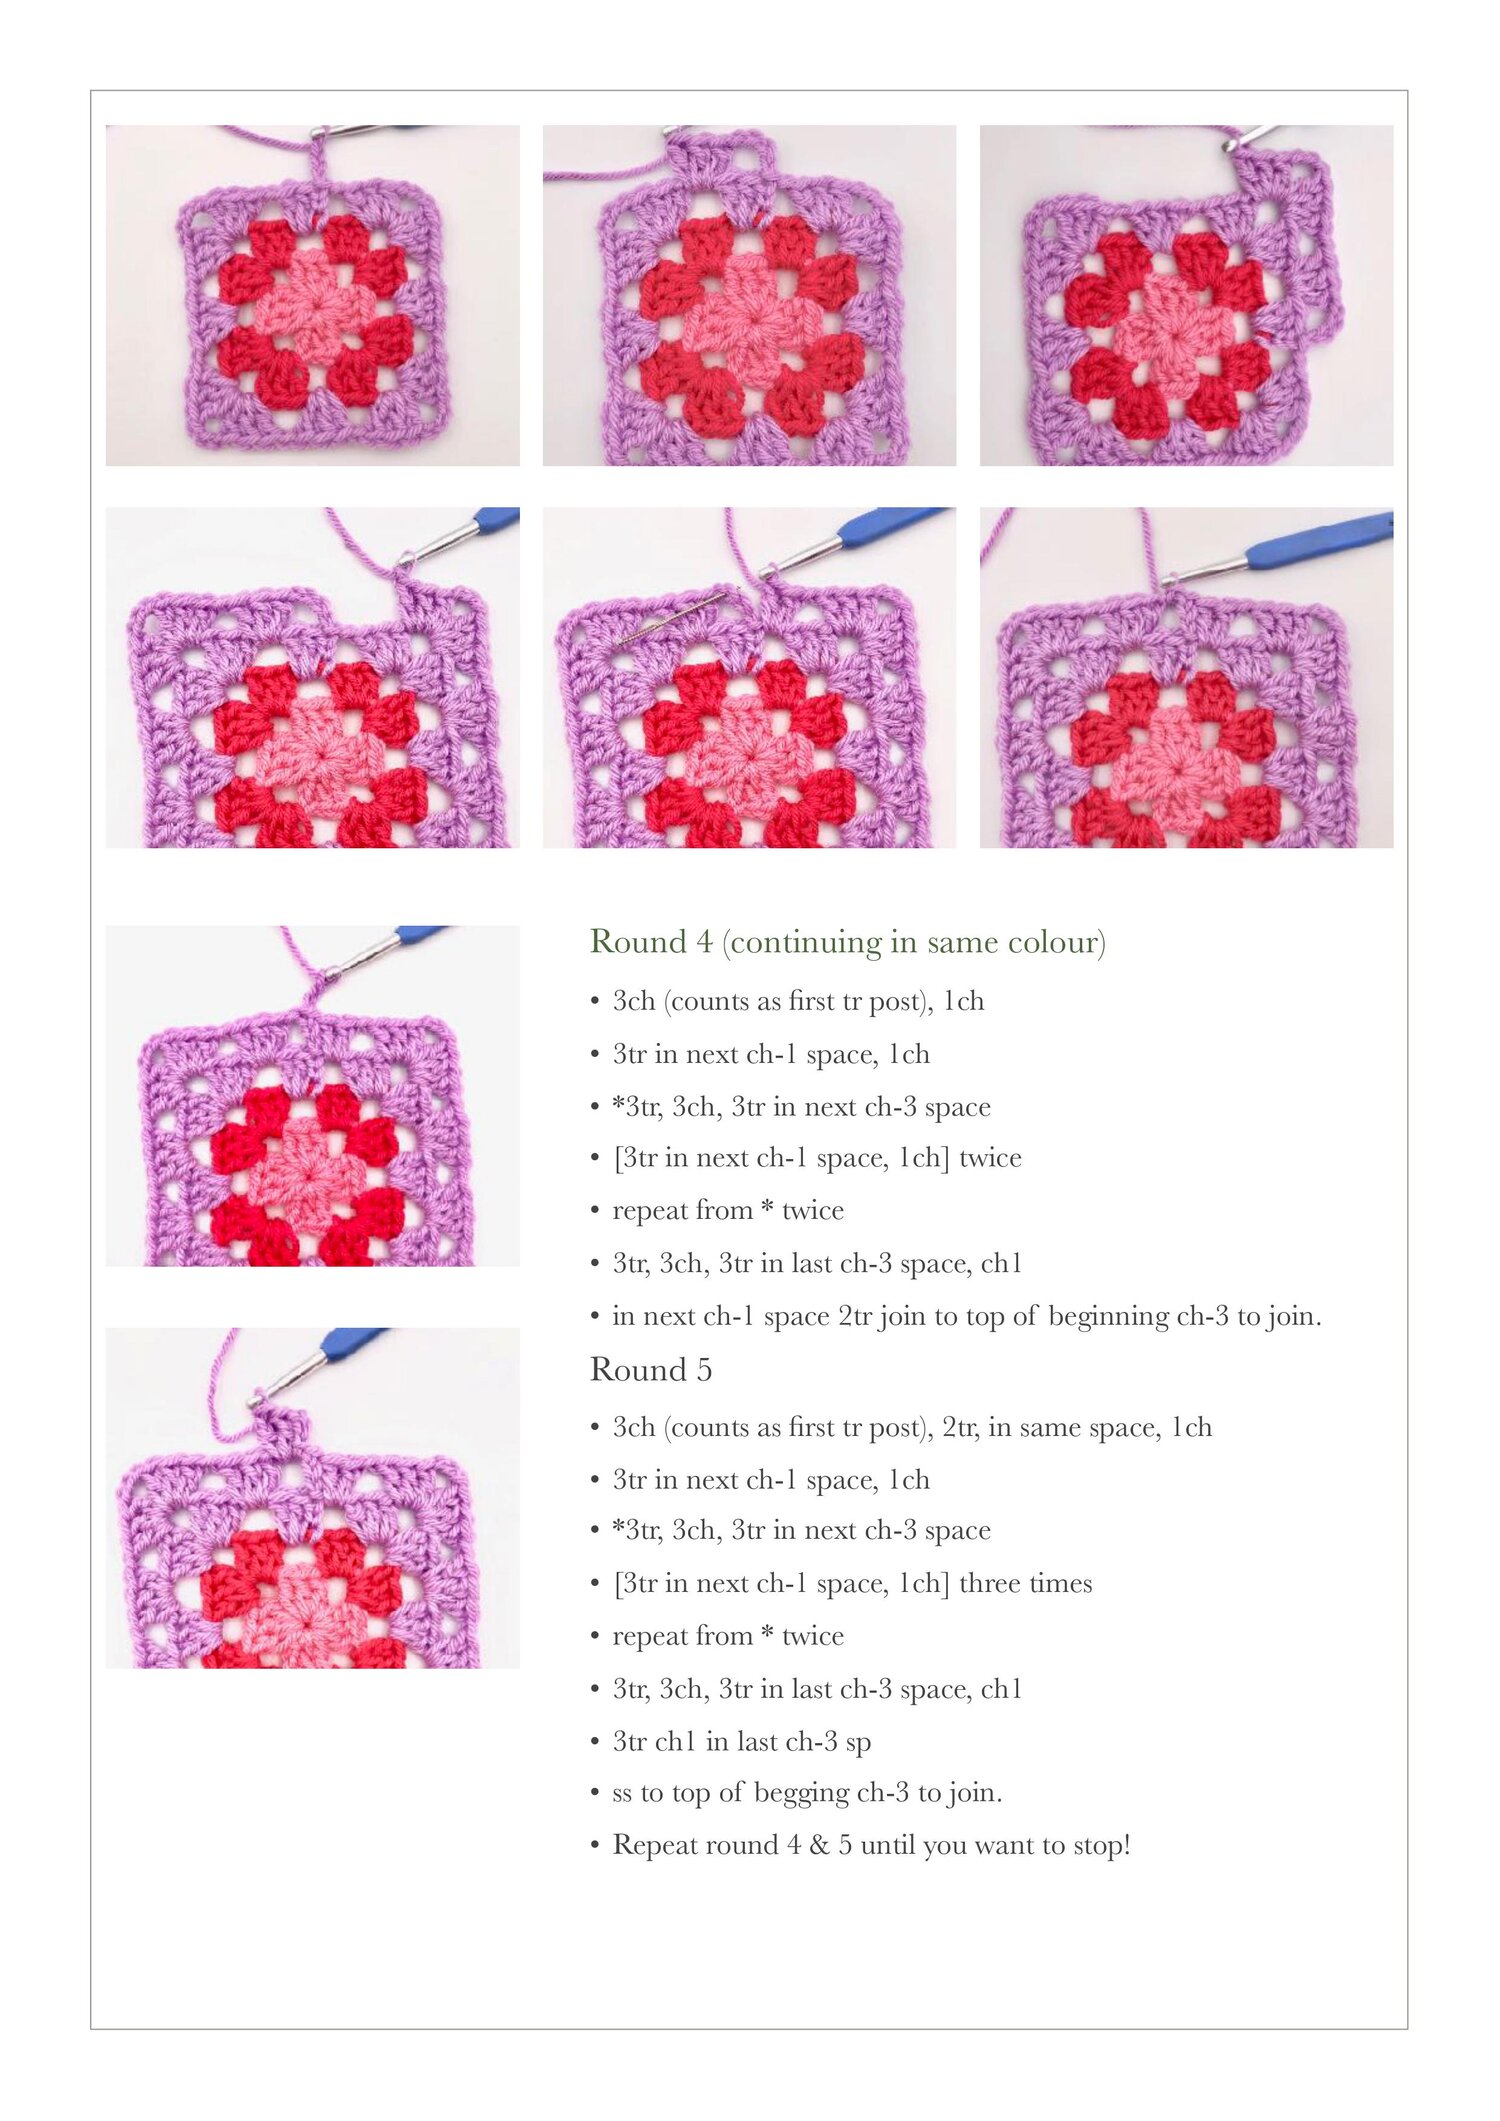 Two Free Patterns to Crochet a Granny Square (+One Pdf)